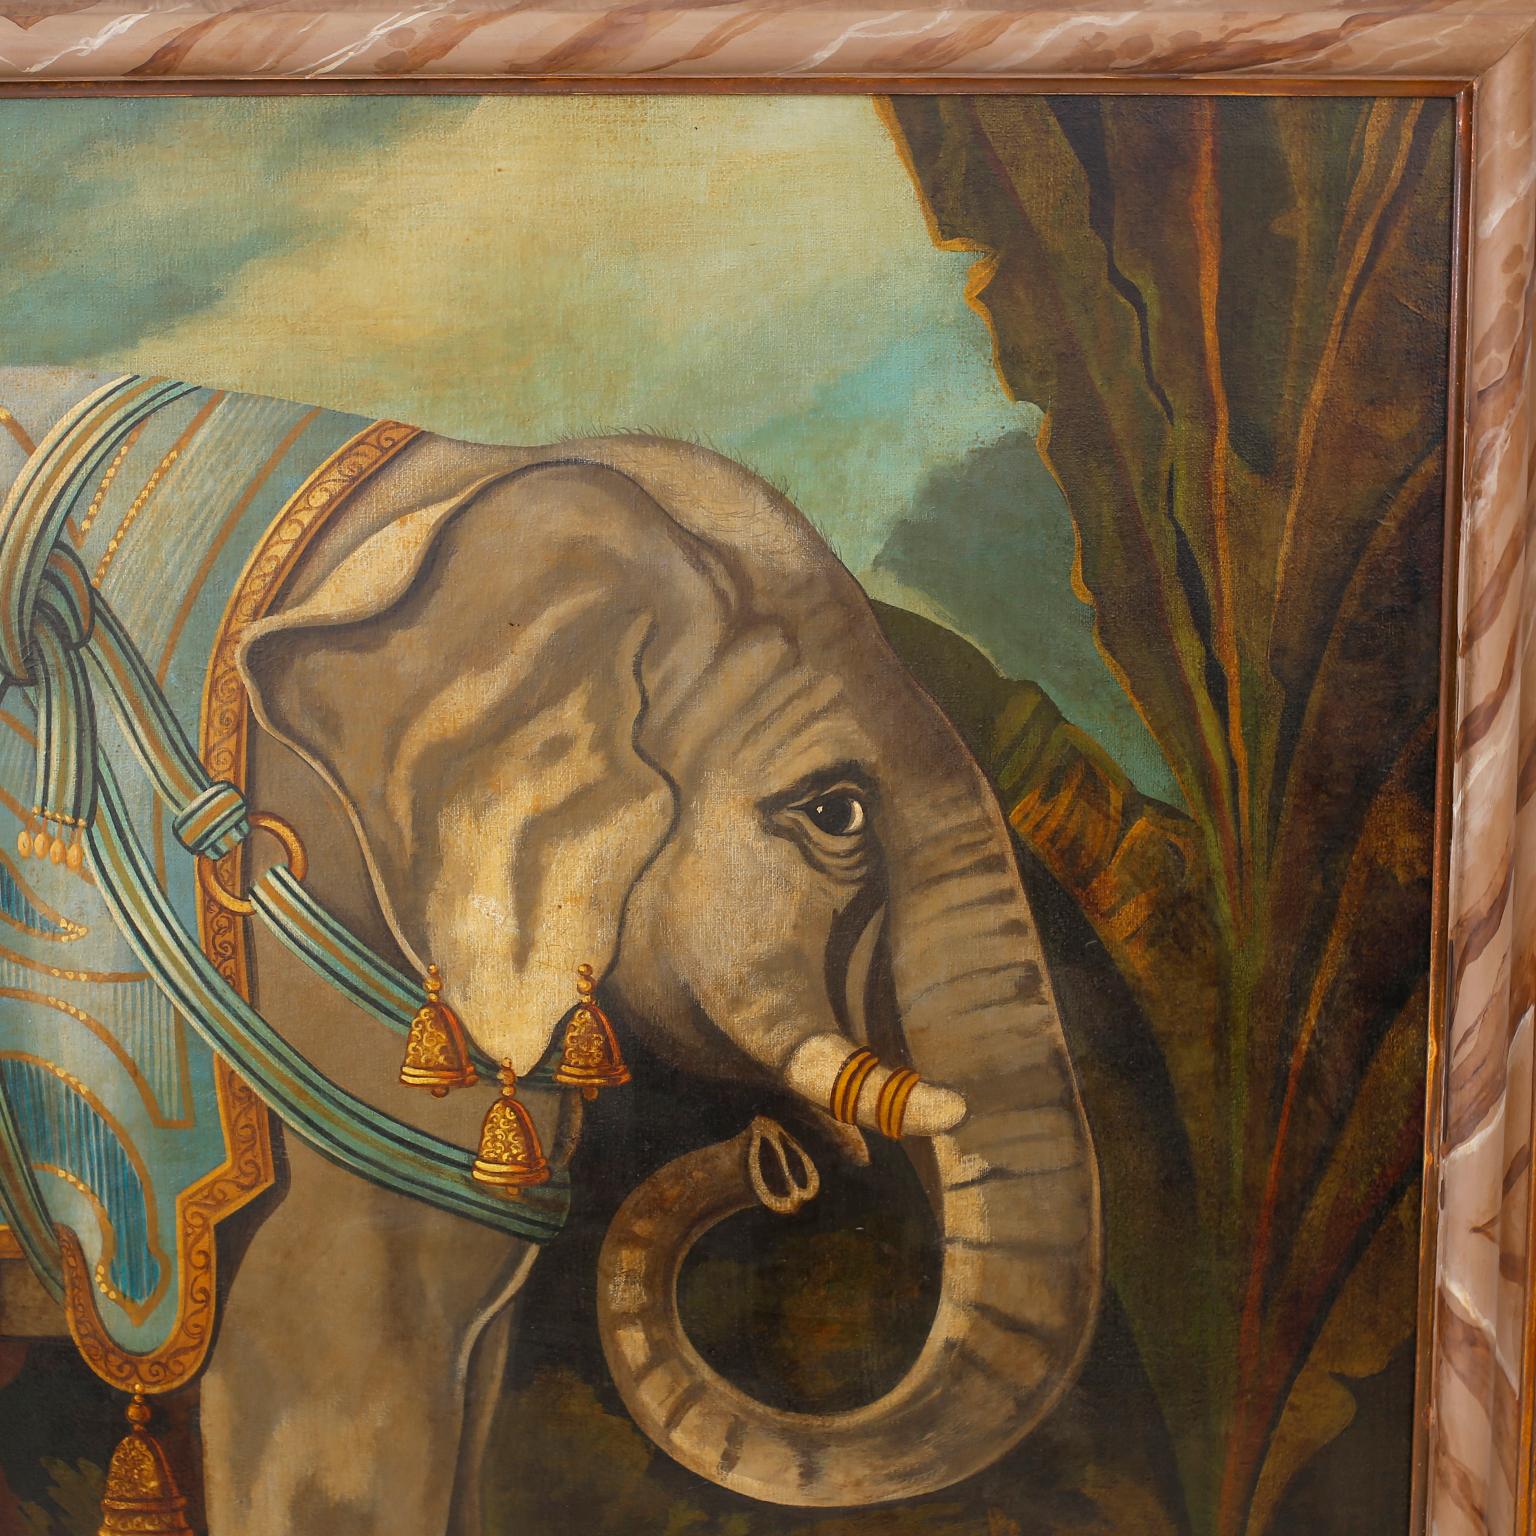 Folk Art Oil Painting on Canvas of an Elephant by William Skilling